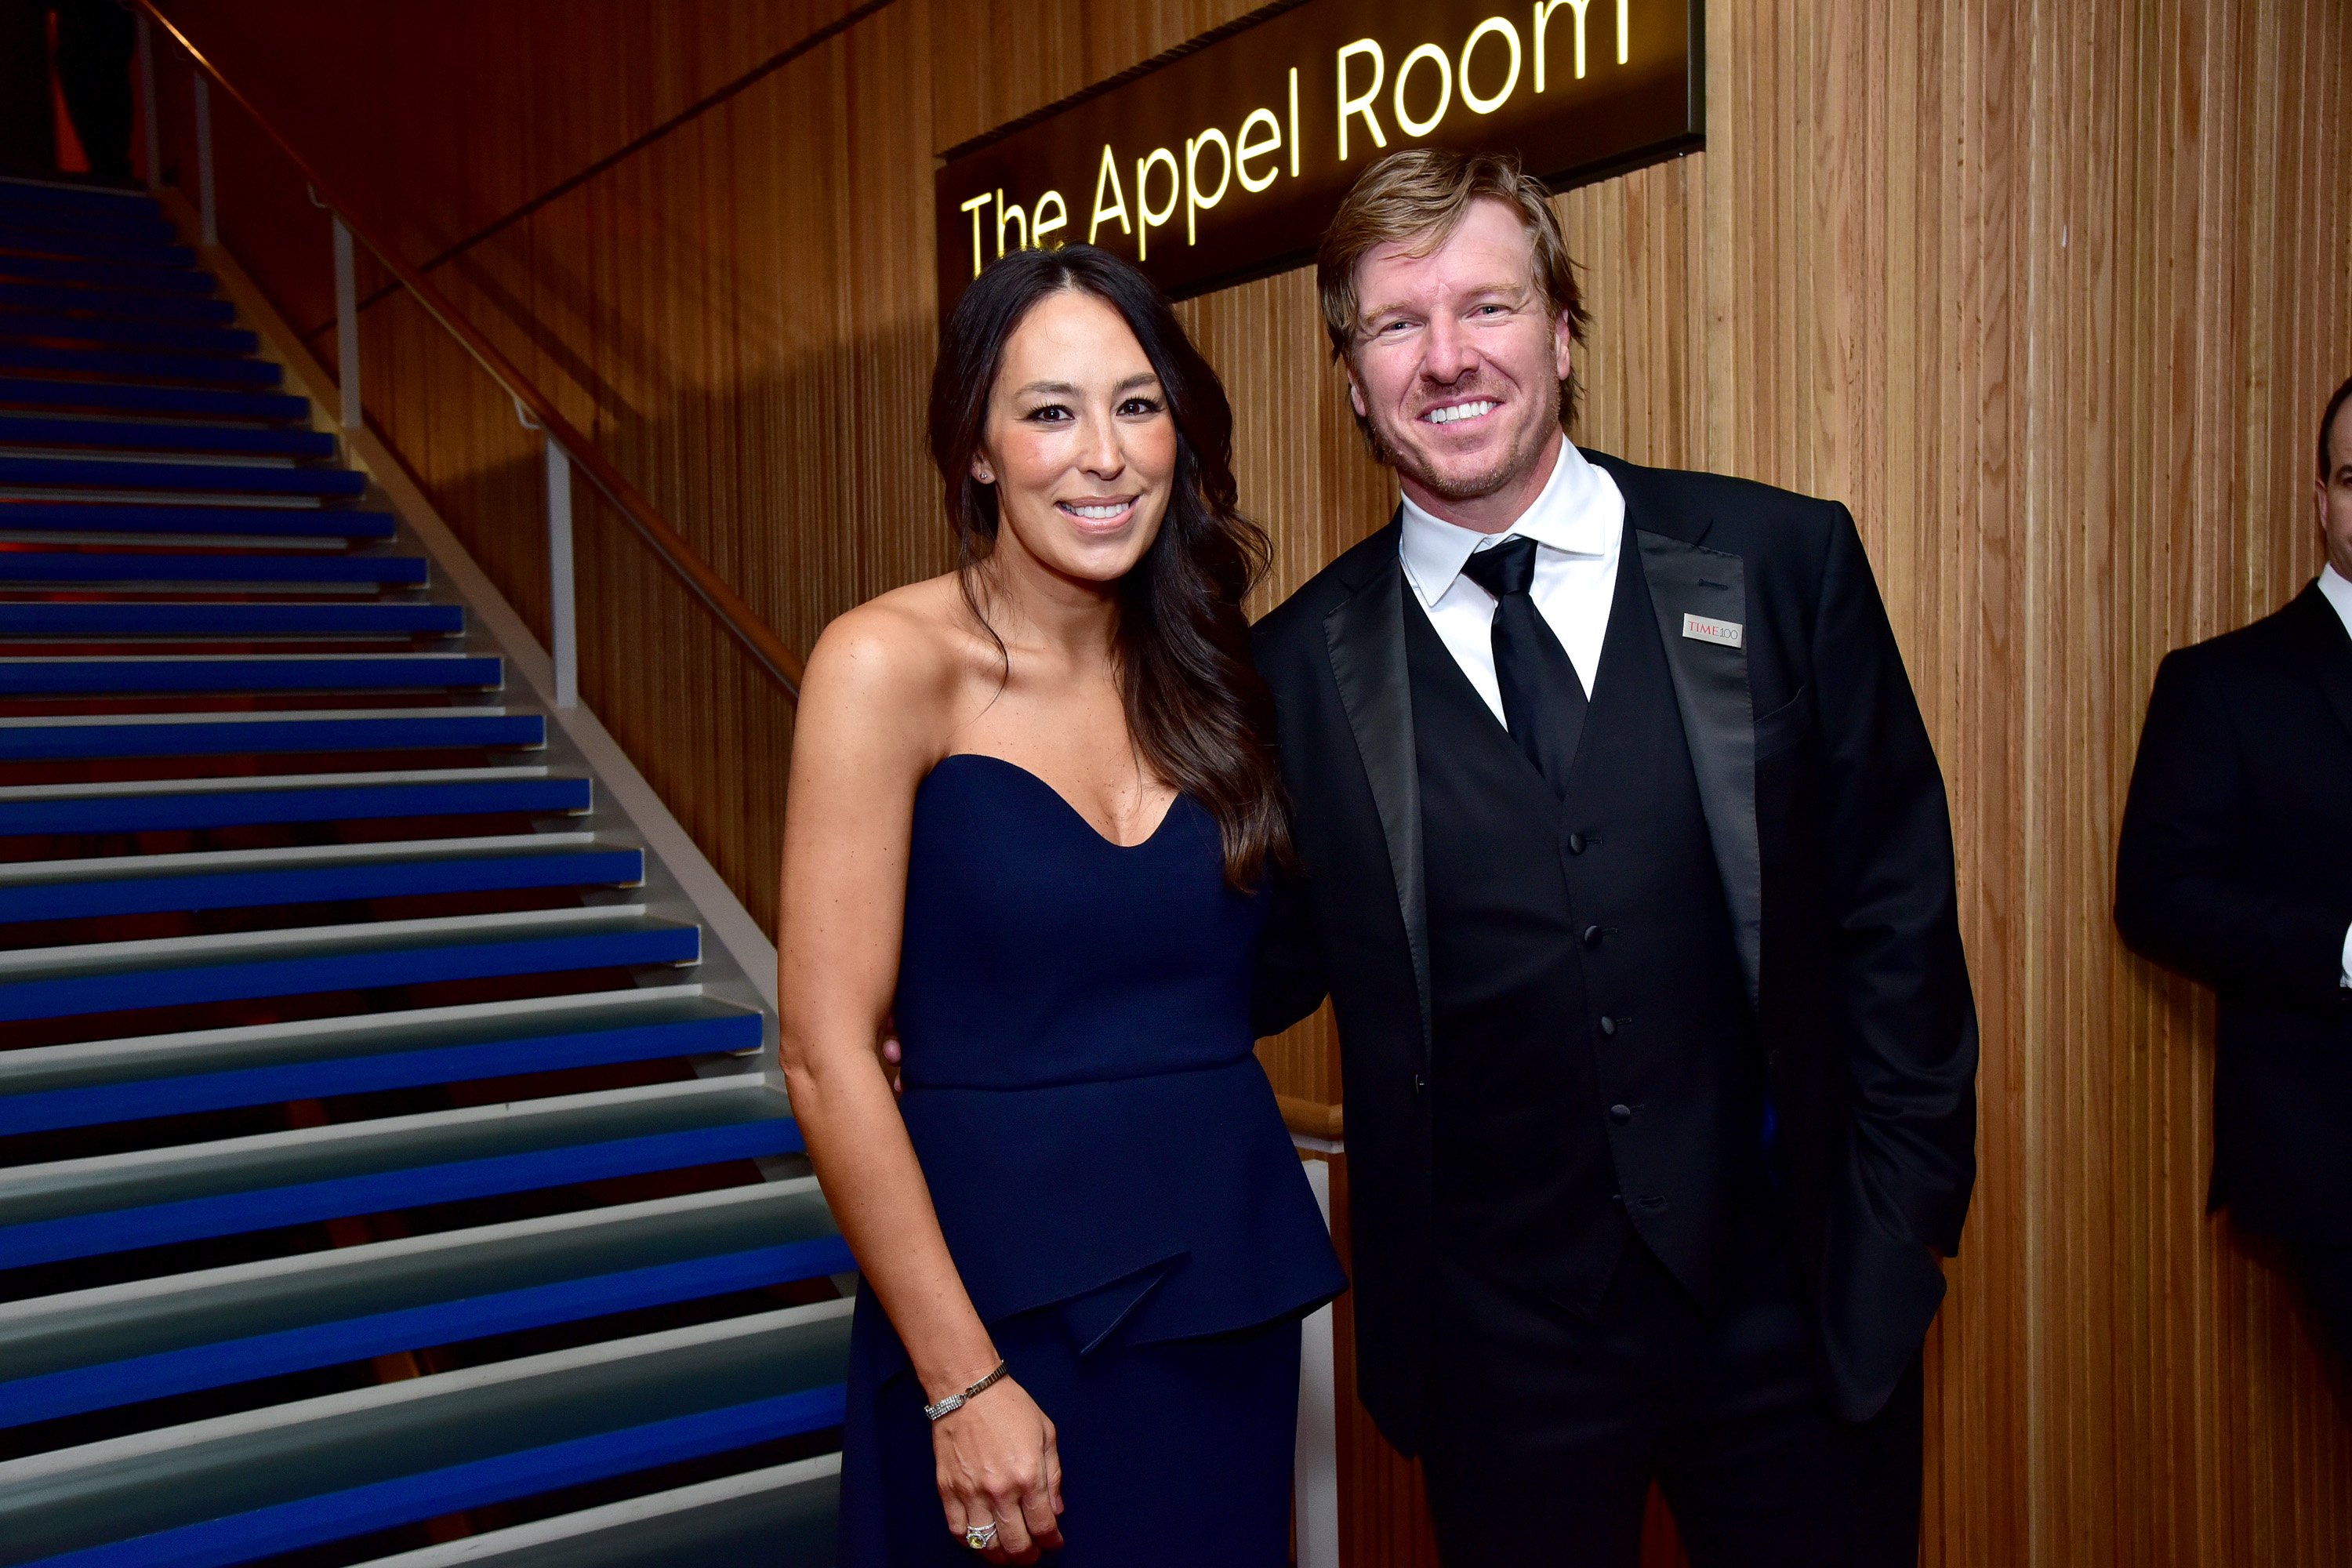 Joanna Gaines in a blue strapless dress and Chip Gaines in a tux